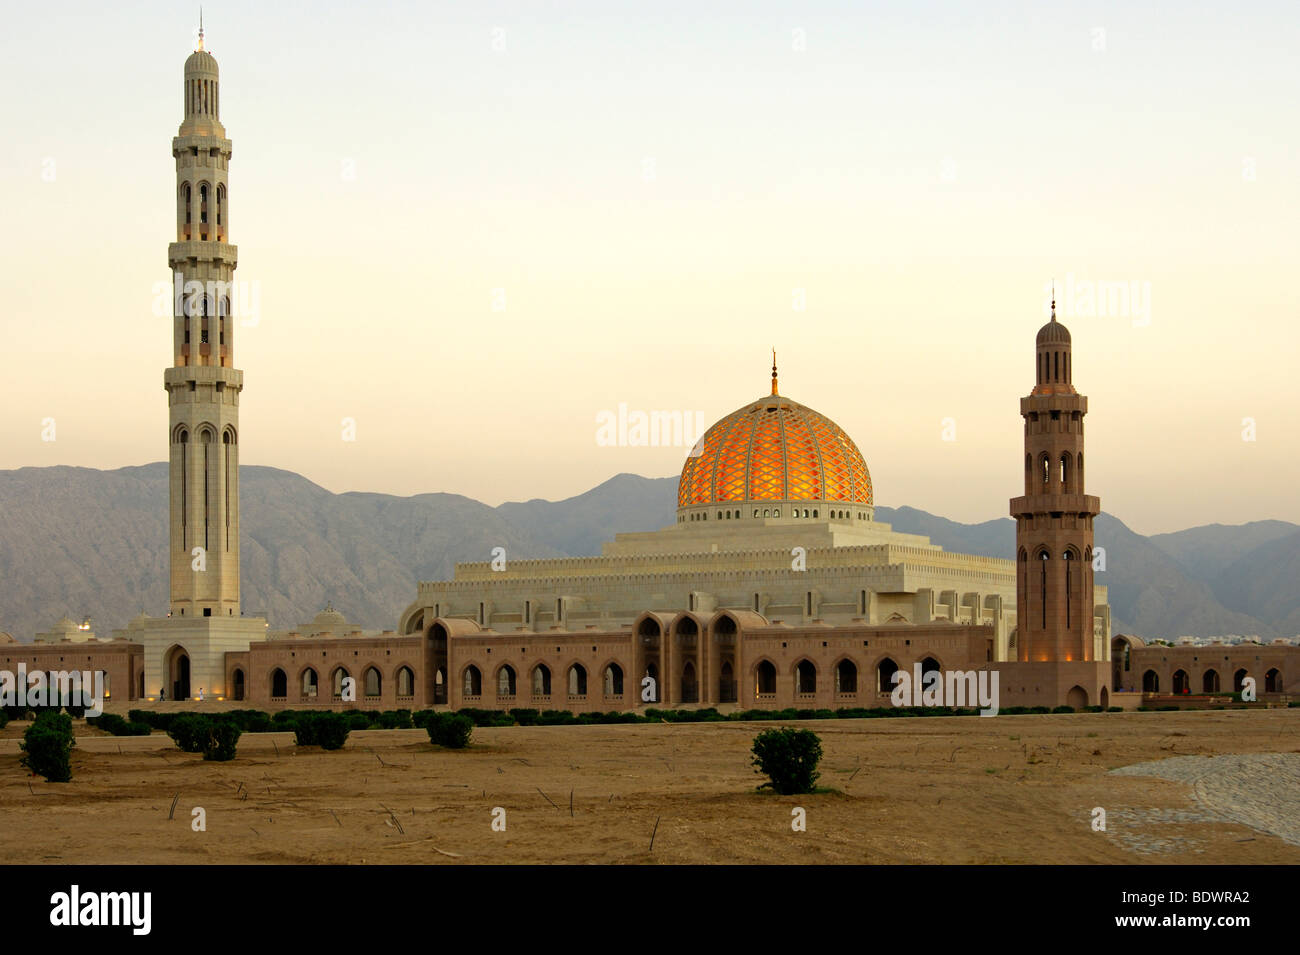 Sultan Qaboos Grand Mosque, Muscat, Sultanate of Oman, Middle East Stock Photo